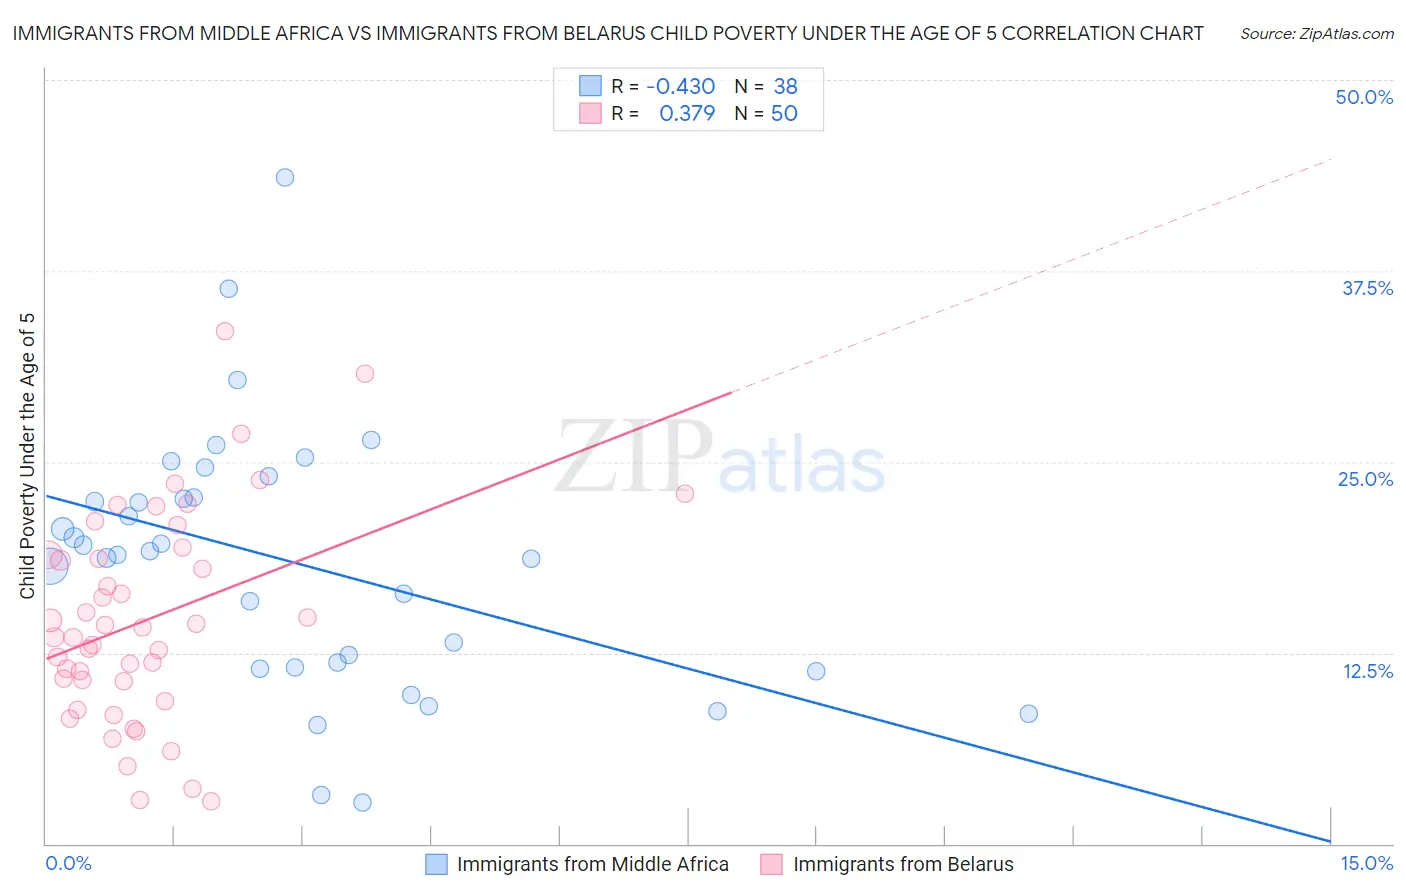 Immigrants from Middle Africa vs Immigrants from Belarus Child Poverty Under the Age of 5